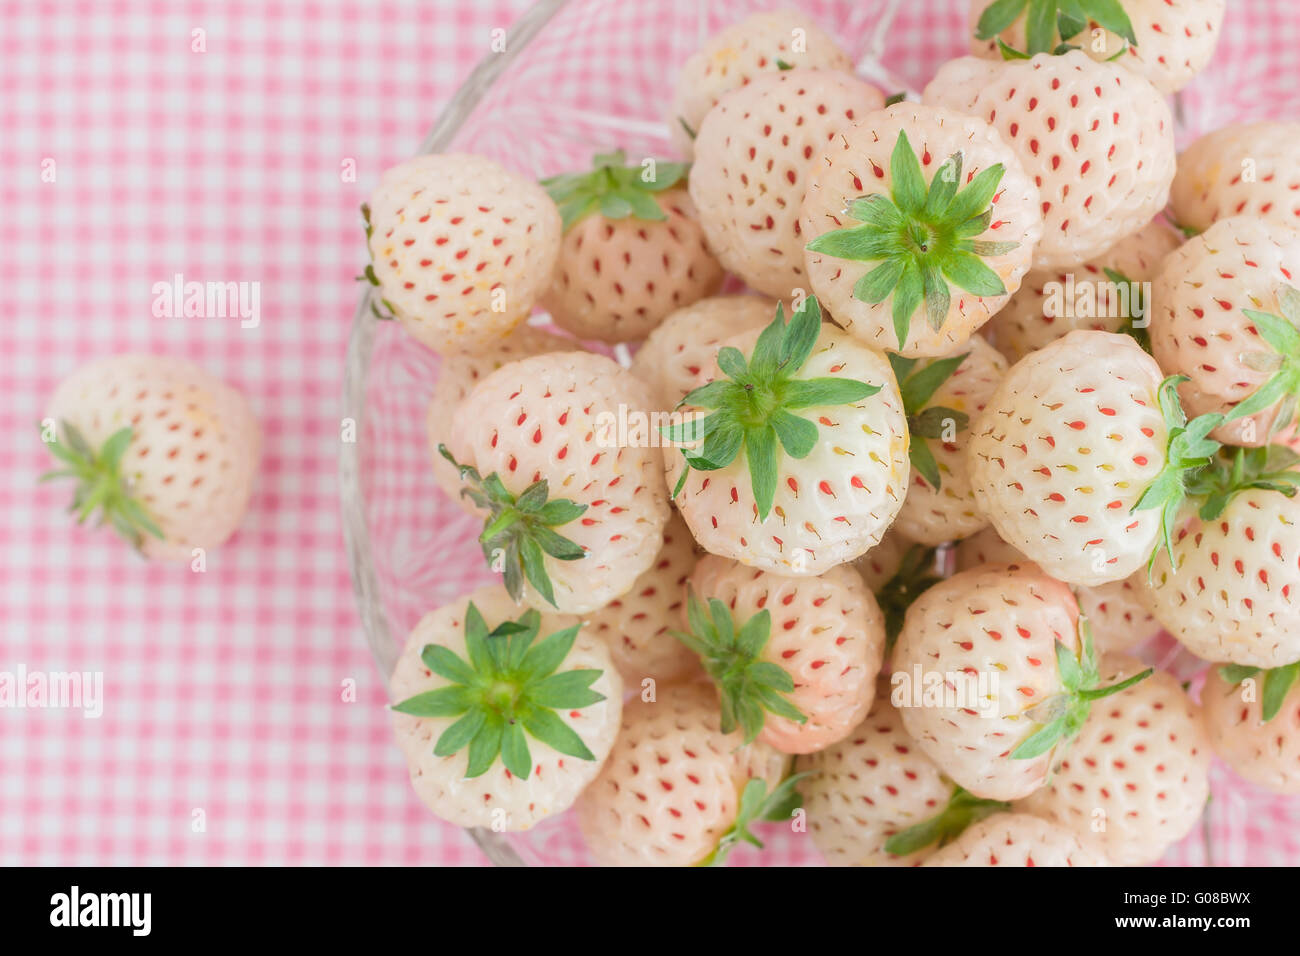 Pineberry or Hula Berry a hybrid strawberry with a pineapple flavor white flesh and red seeds Stock Photo